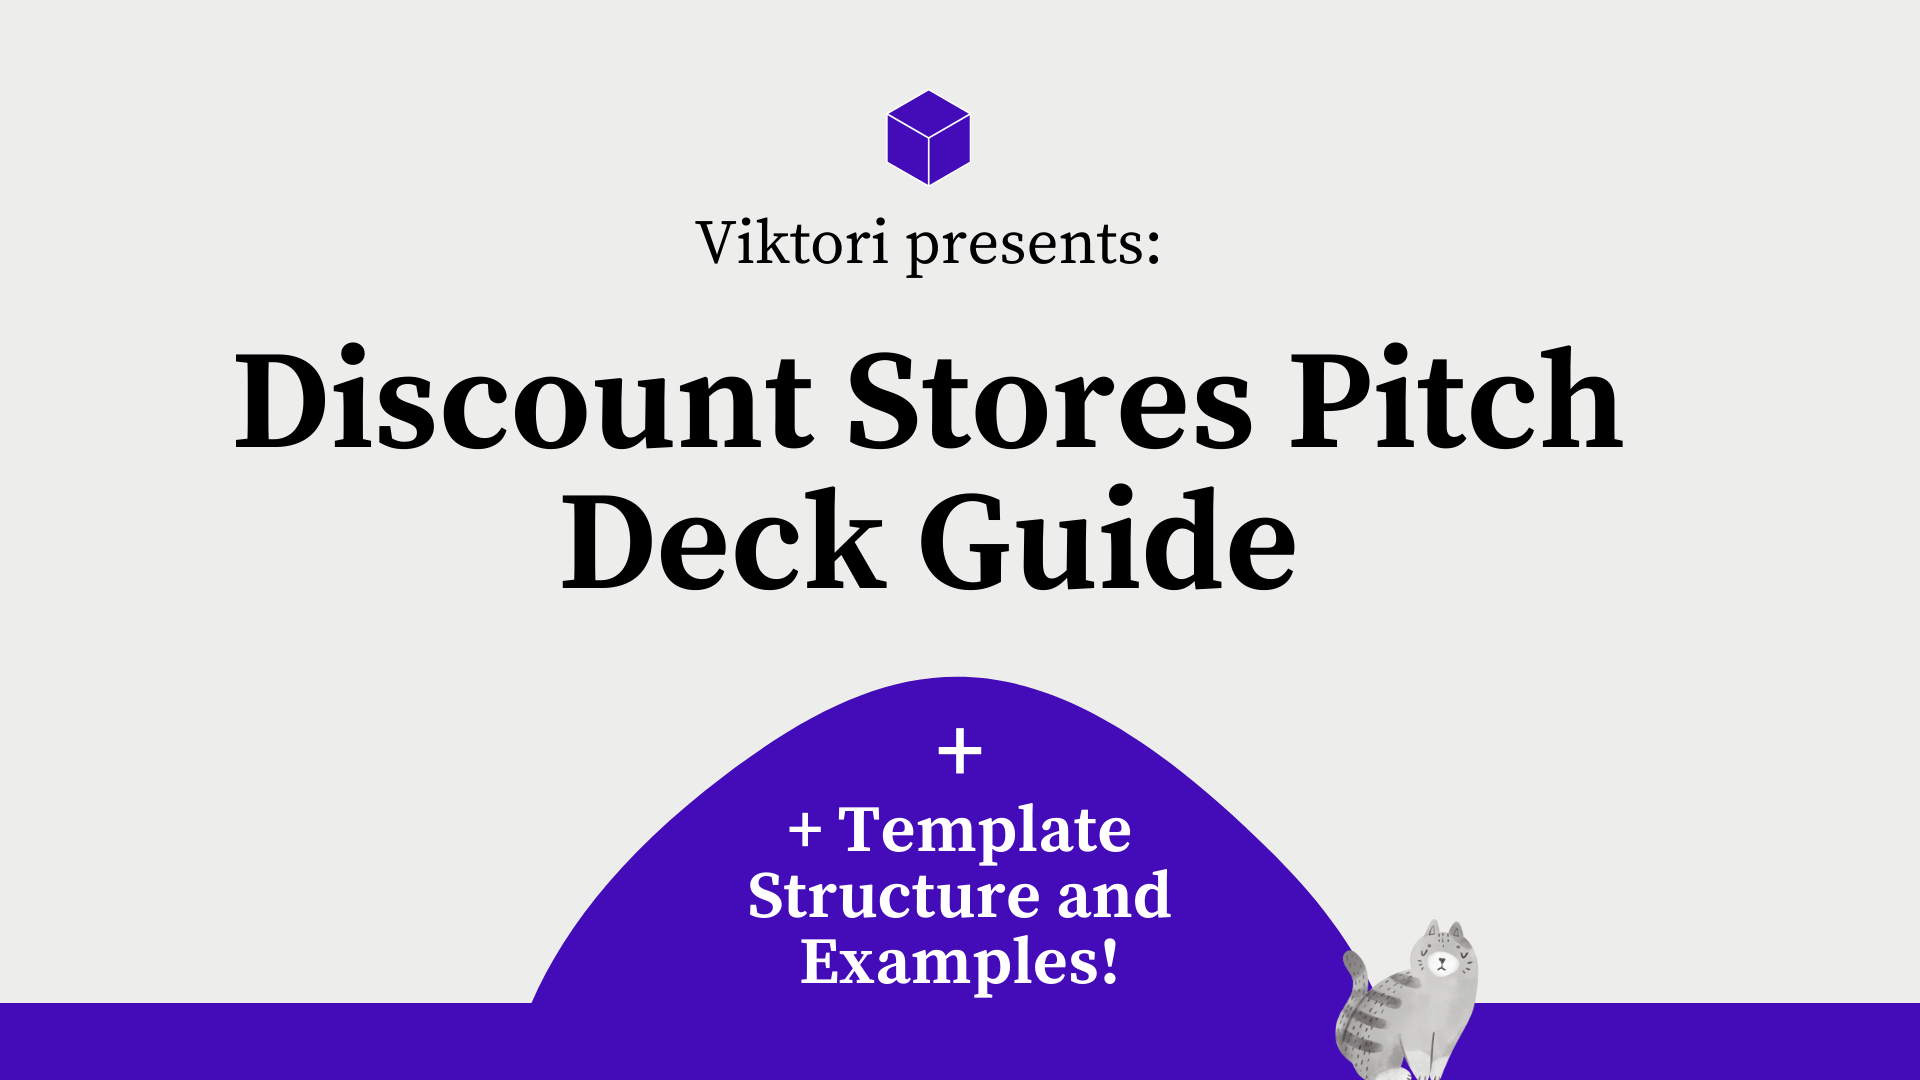 Discount Stores Pitch Deck Guide